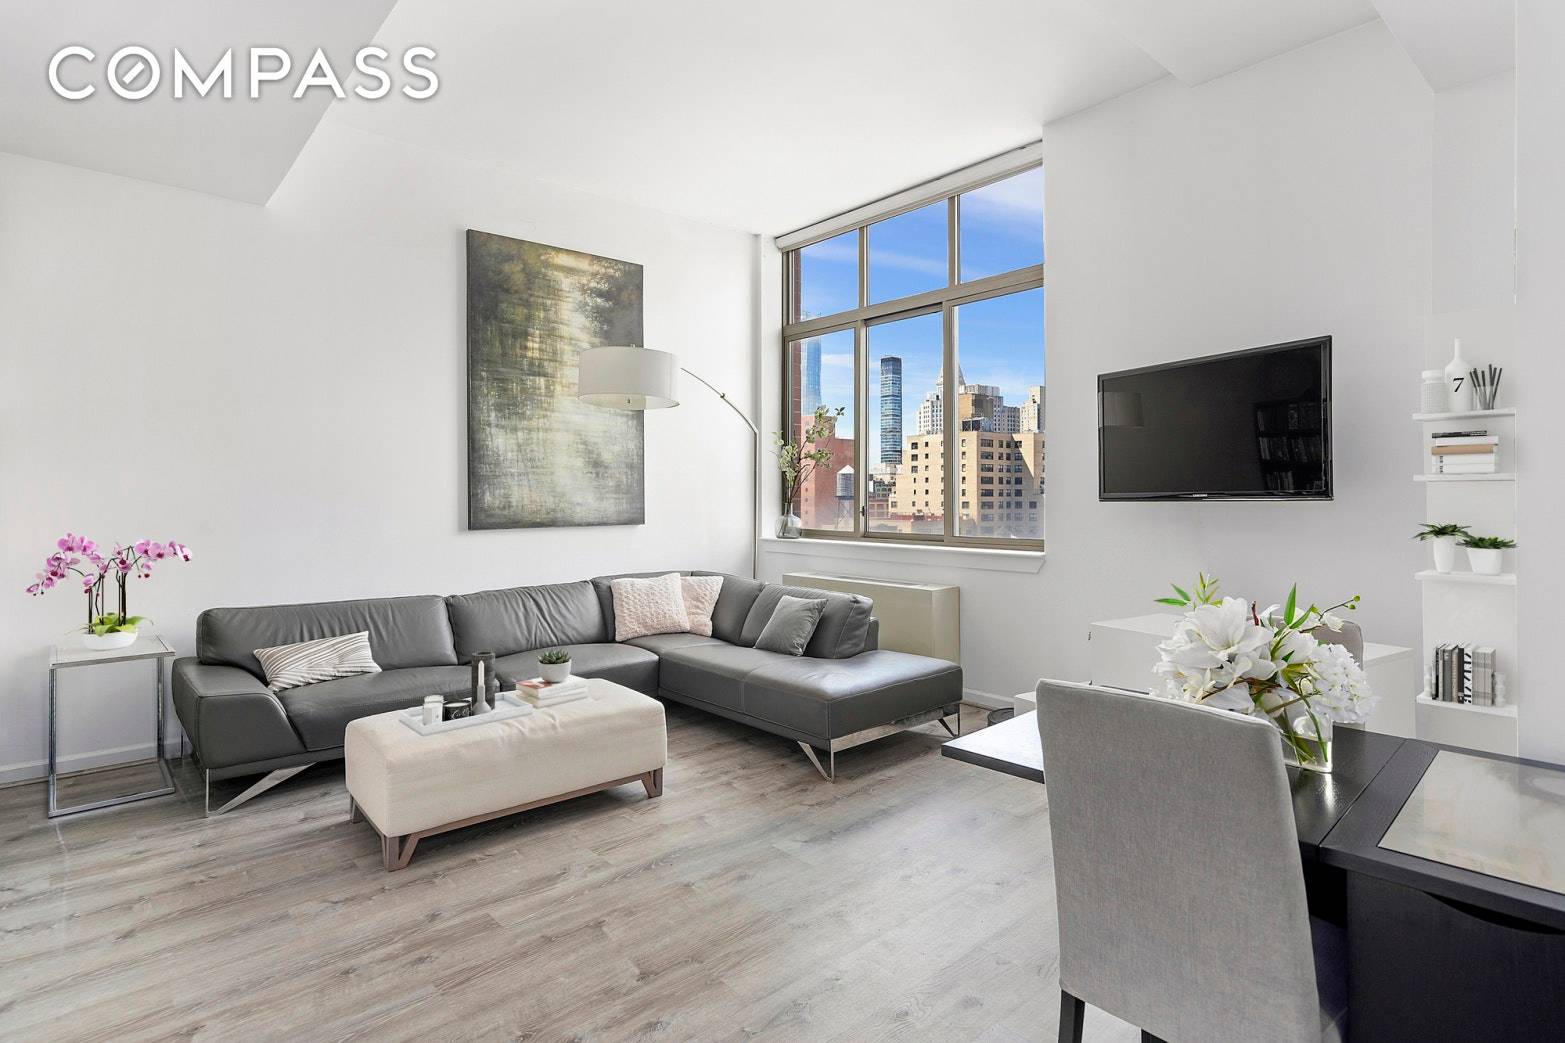 Penthouse Perfection ! Welcome home to this 1, 130 sqft 2 bedroom, 2 bathroom boasting expansive city views featuring the Empire State Building and The Freedom Tower to the South ...